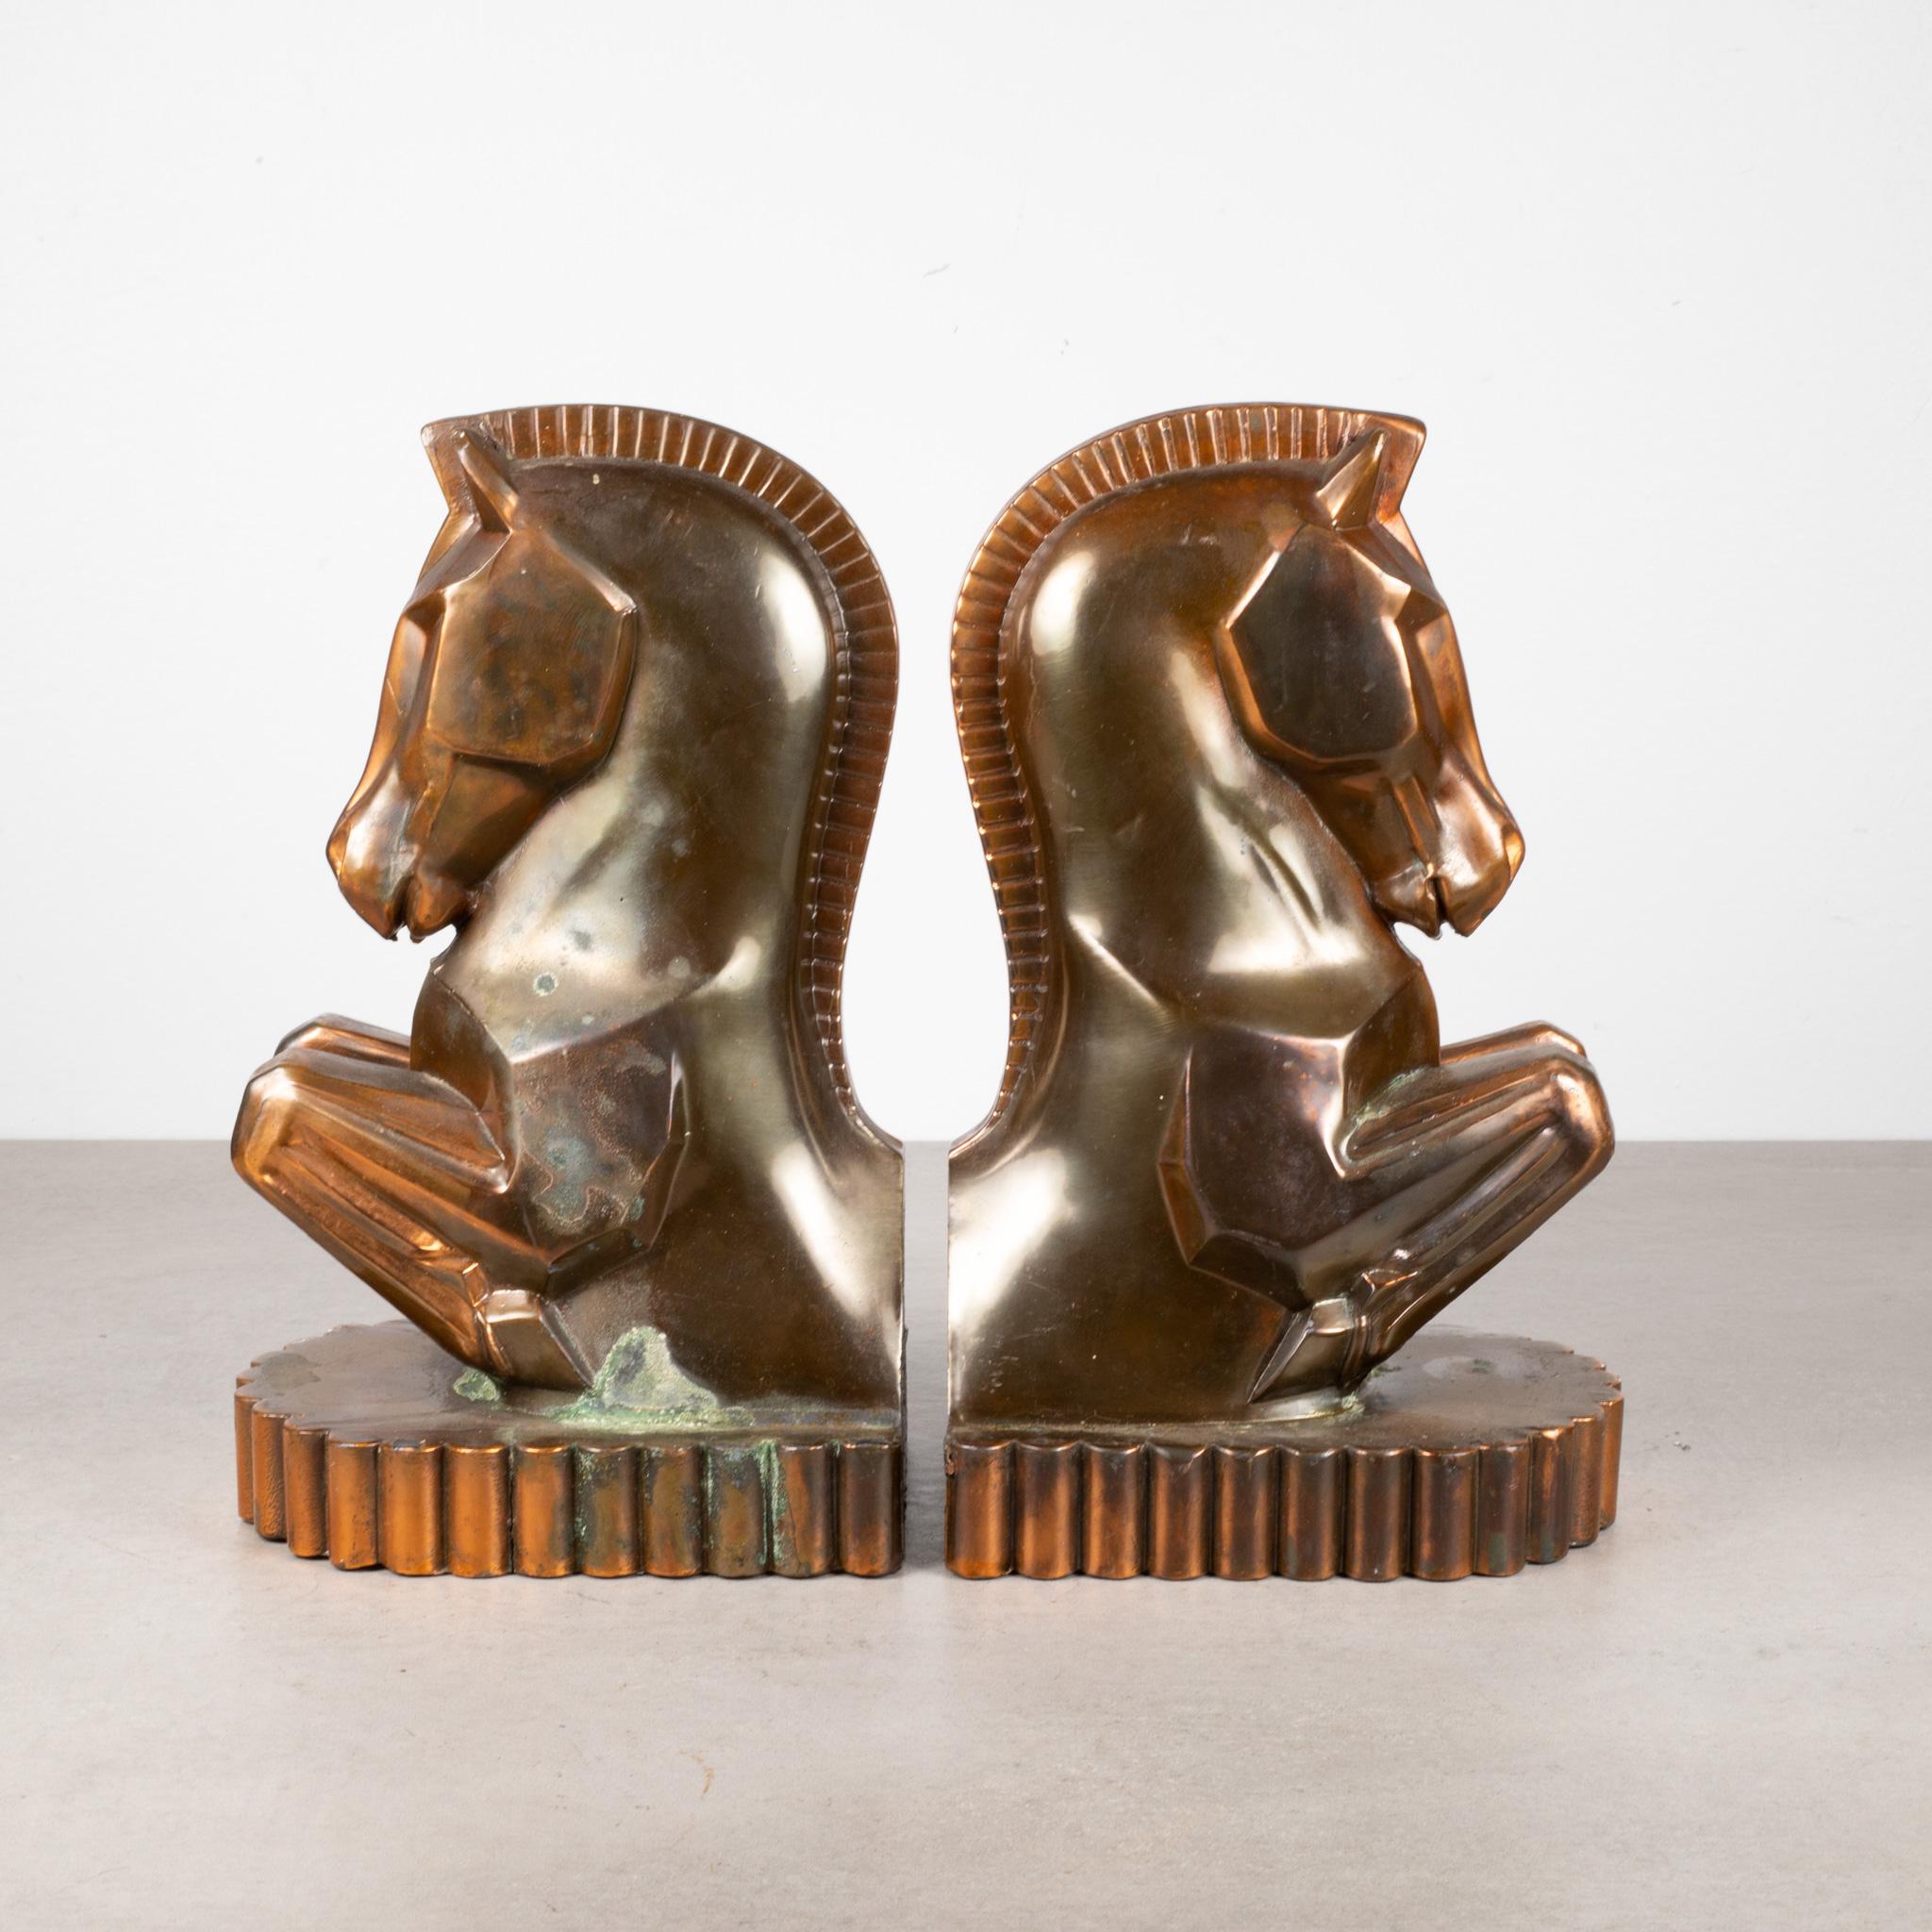 Oversize Art Deco Bronze Plated Trojan Horse Bookends, c.1930  (FREE SHIPPING) In Good Condition For Sale In San Francisco, CA